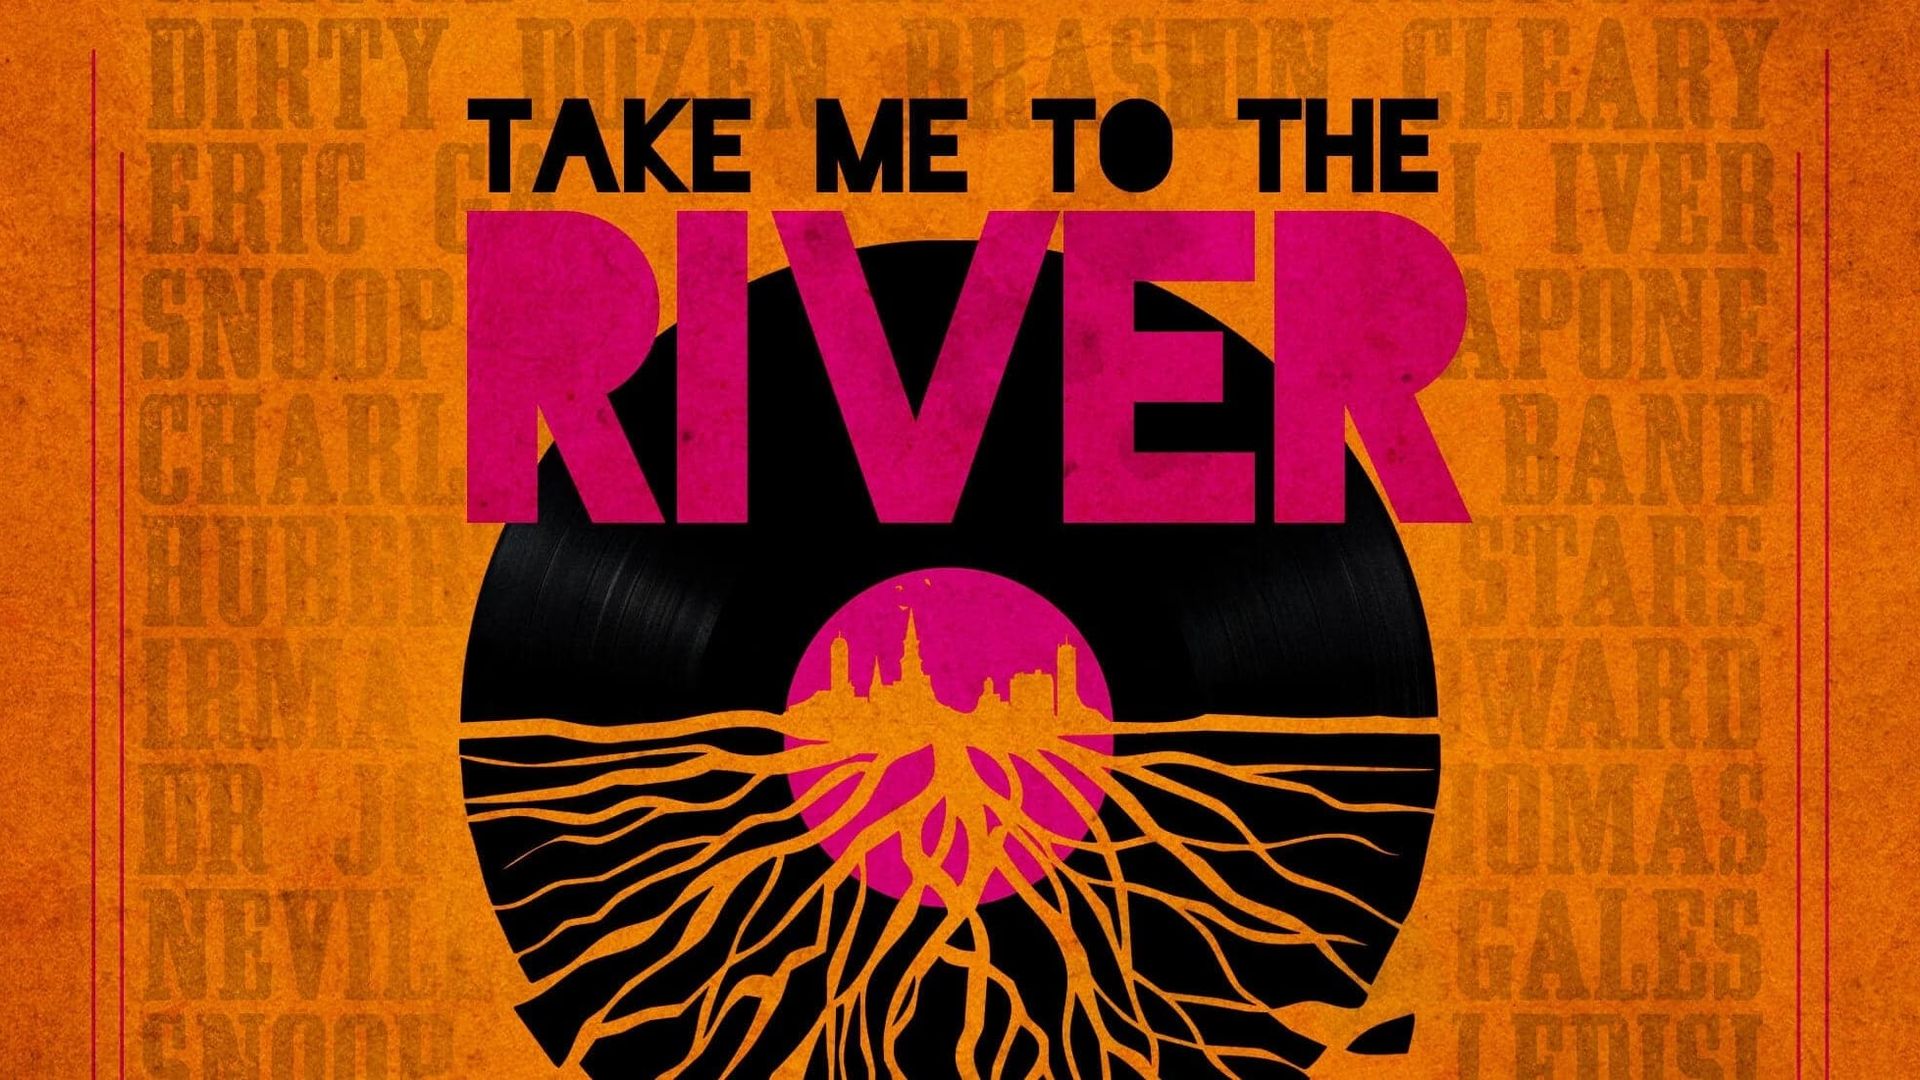 Take Me to the River: New Orleans background